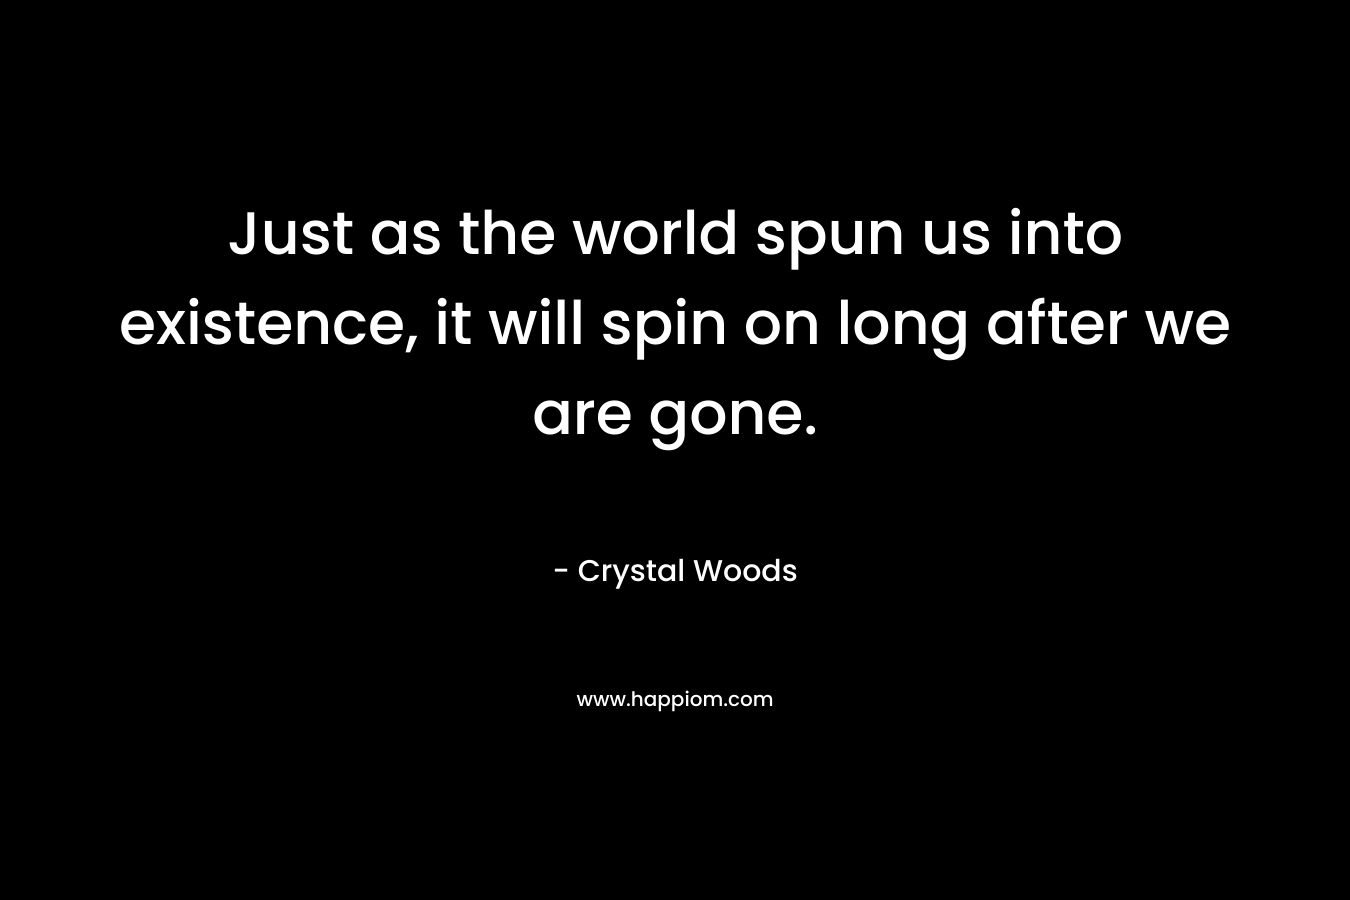 Just as the world spun us into existence, it will spin on long after we are gone. – Crystal Woods